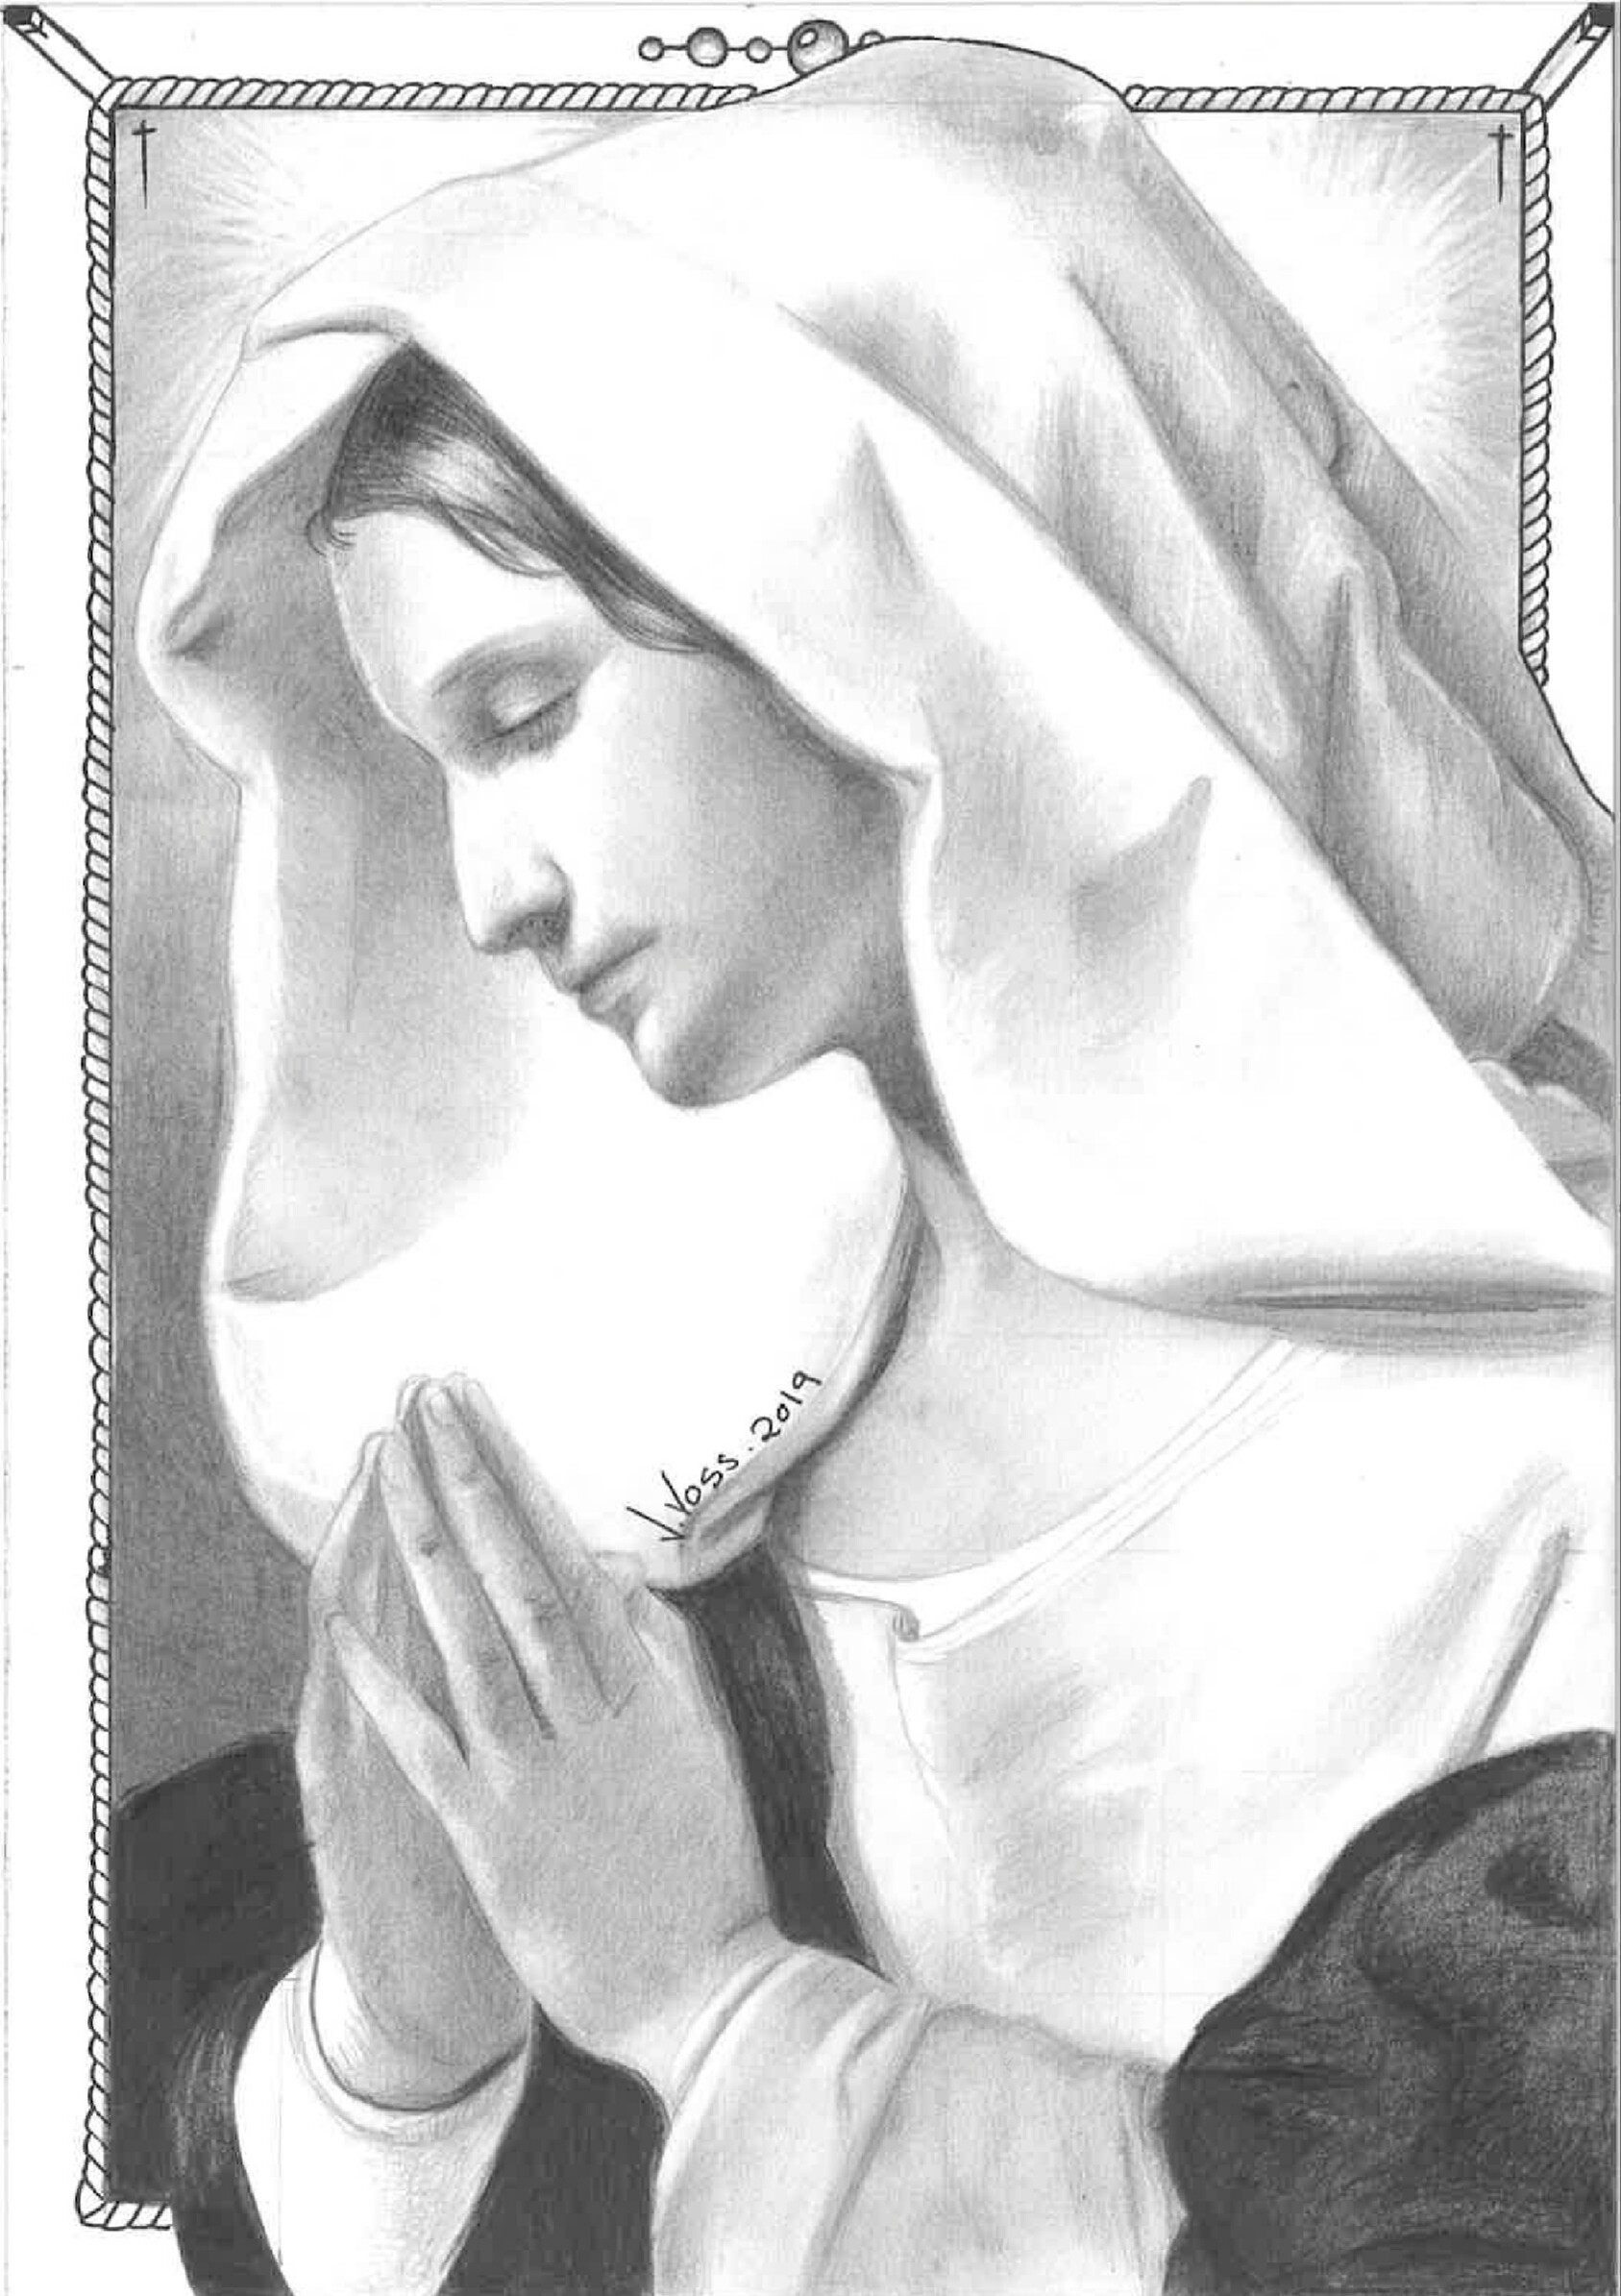 Virgin Mary's Portrait Pencil Speed Drawing by joecymijares | Virgin mary  art, Virgin mary tattoo, Virgin mary